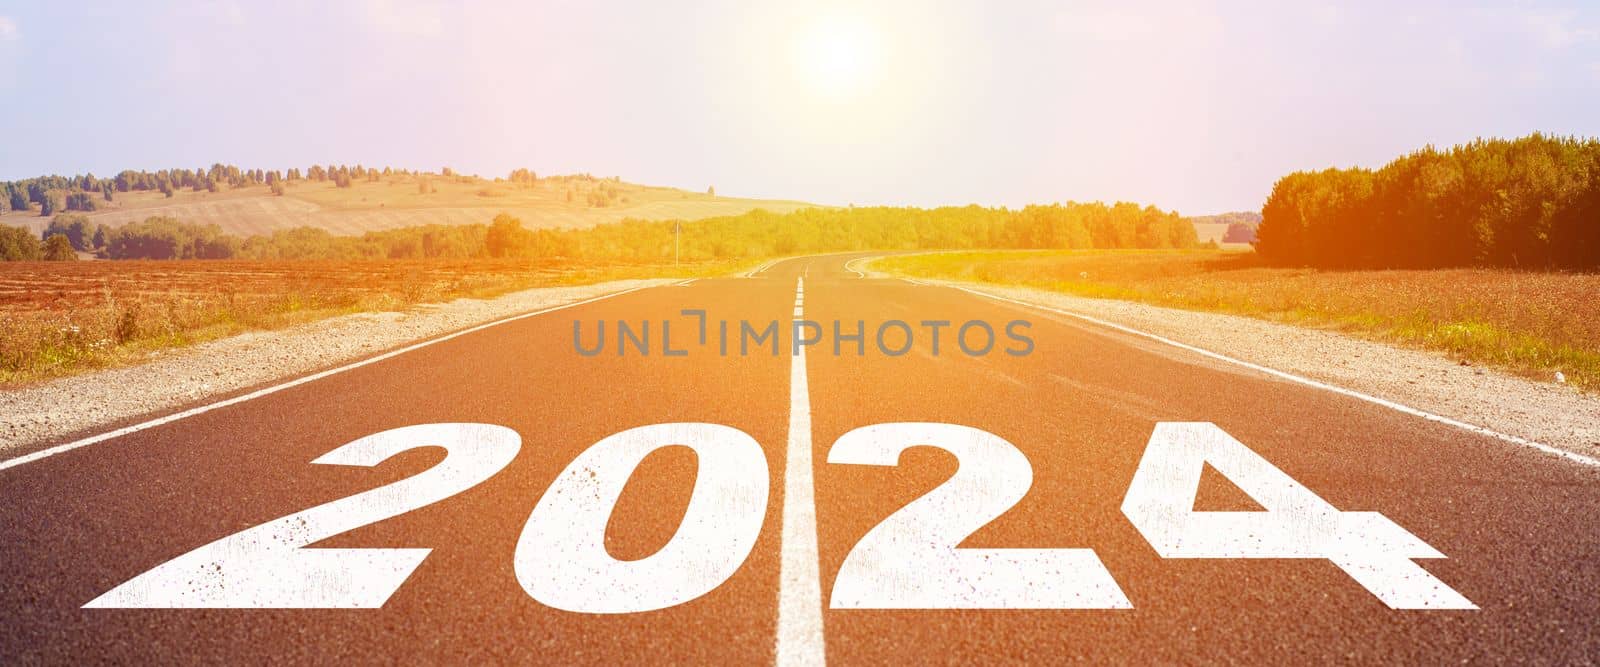 2024 written on highway road in the middle of empty asphalt road and beautiful blue sky. Concept for vision new year 2024.